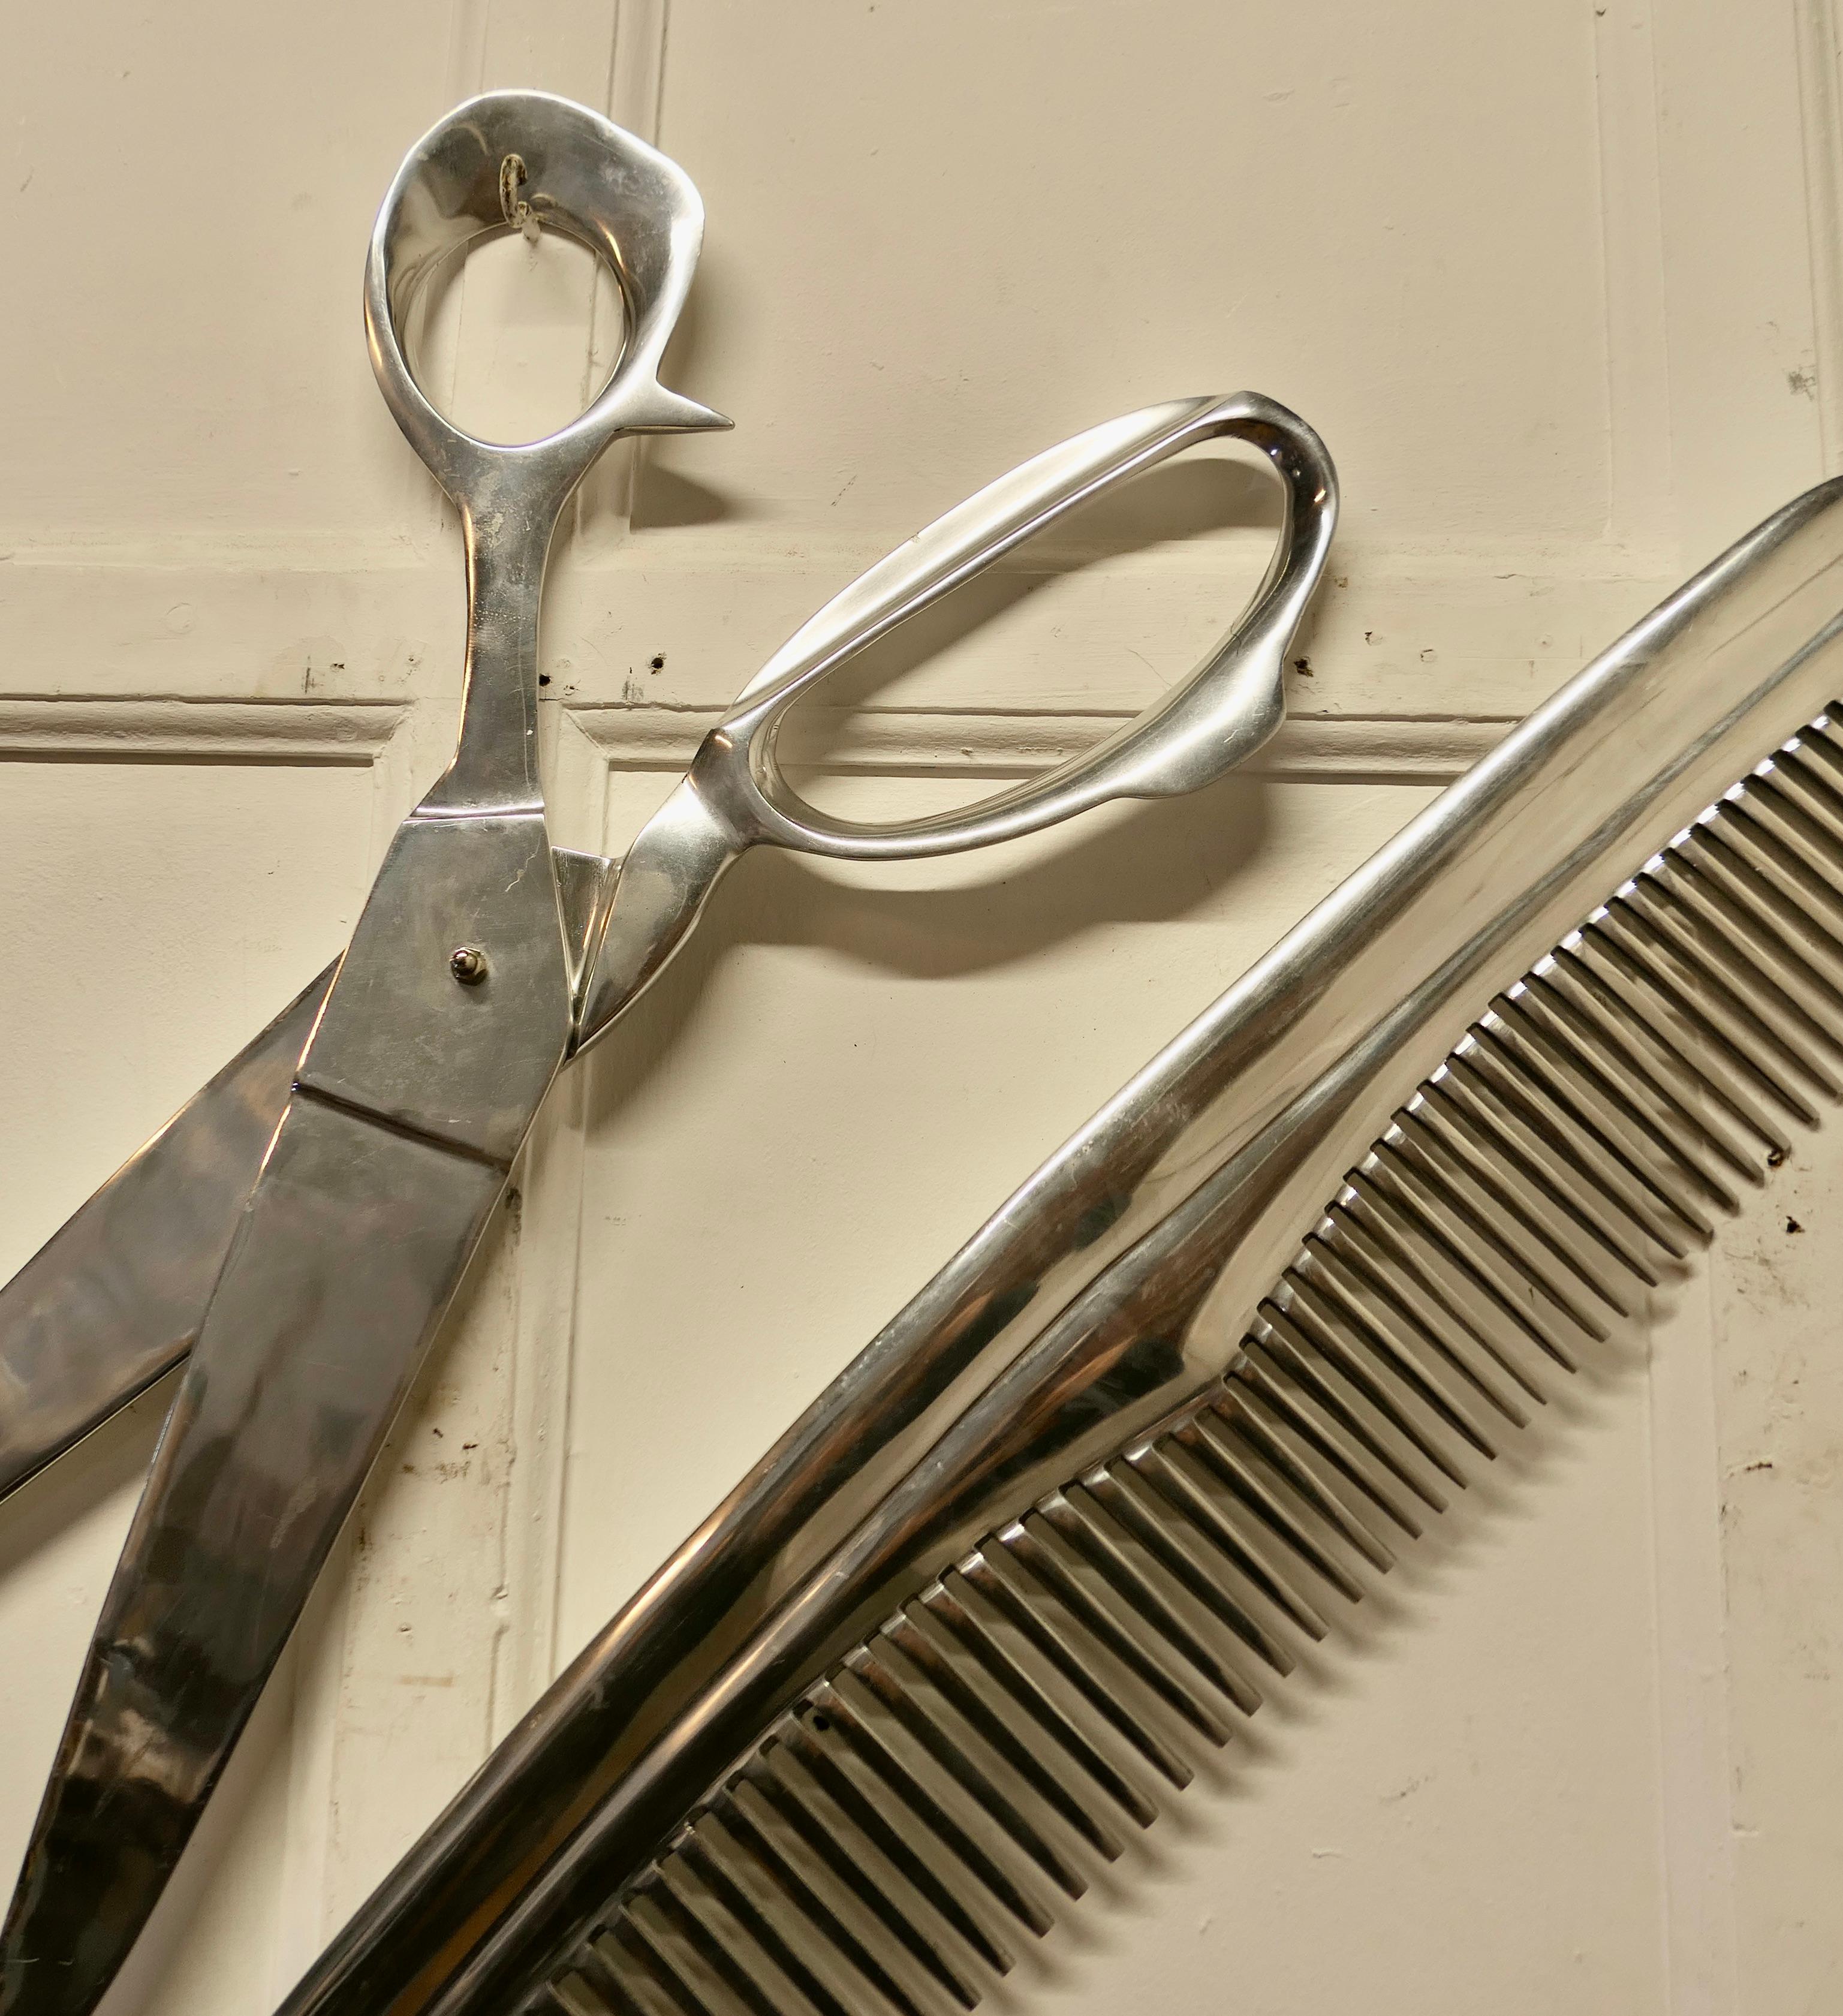 Barber Shop Trade Sign, Giant Comb and Scissors   Larger than life  In Good Condition For Sale In Chillerton, Isle of Wight